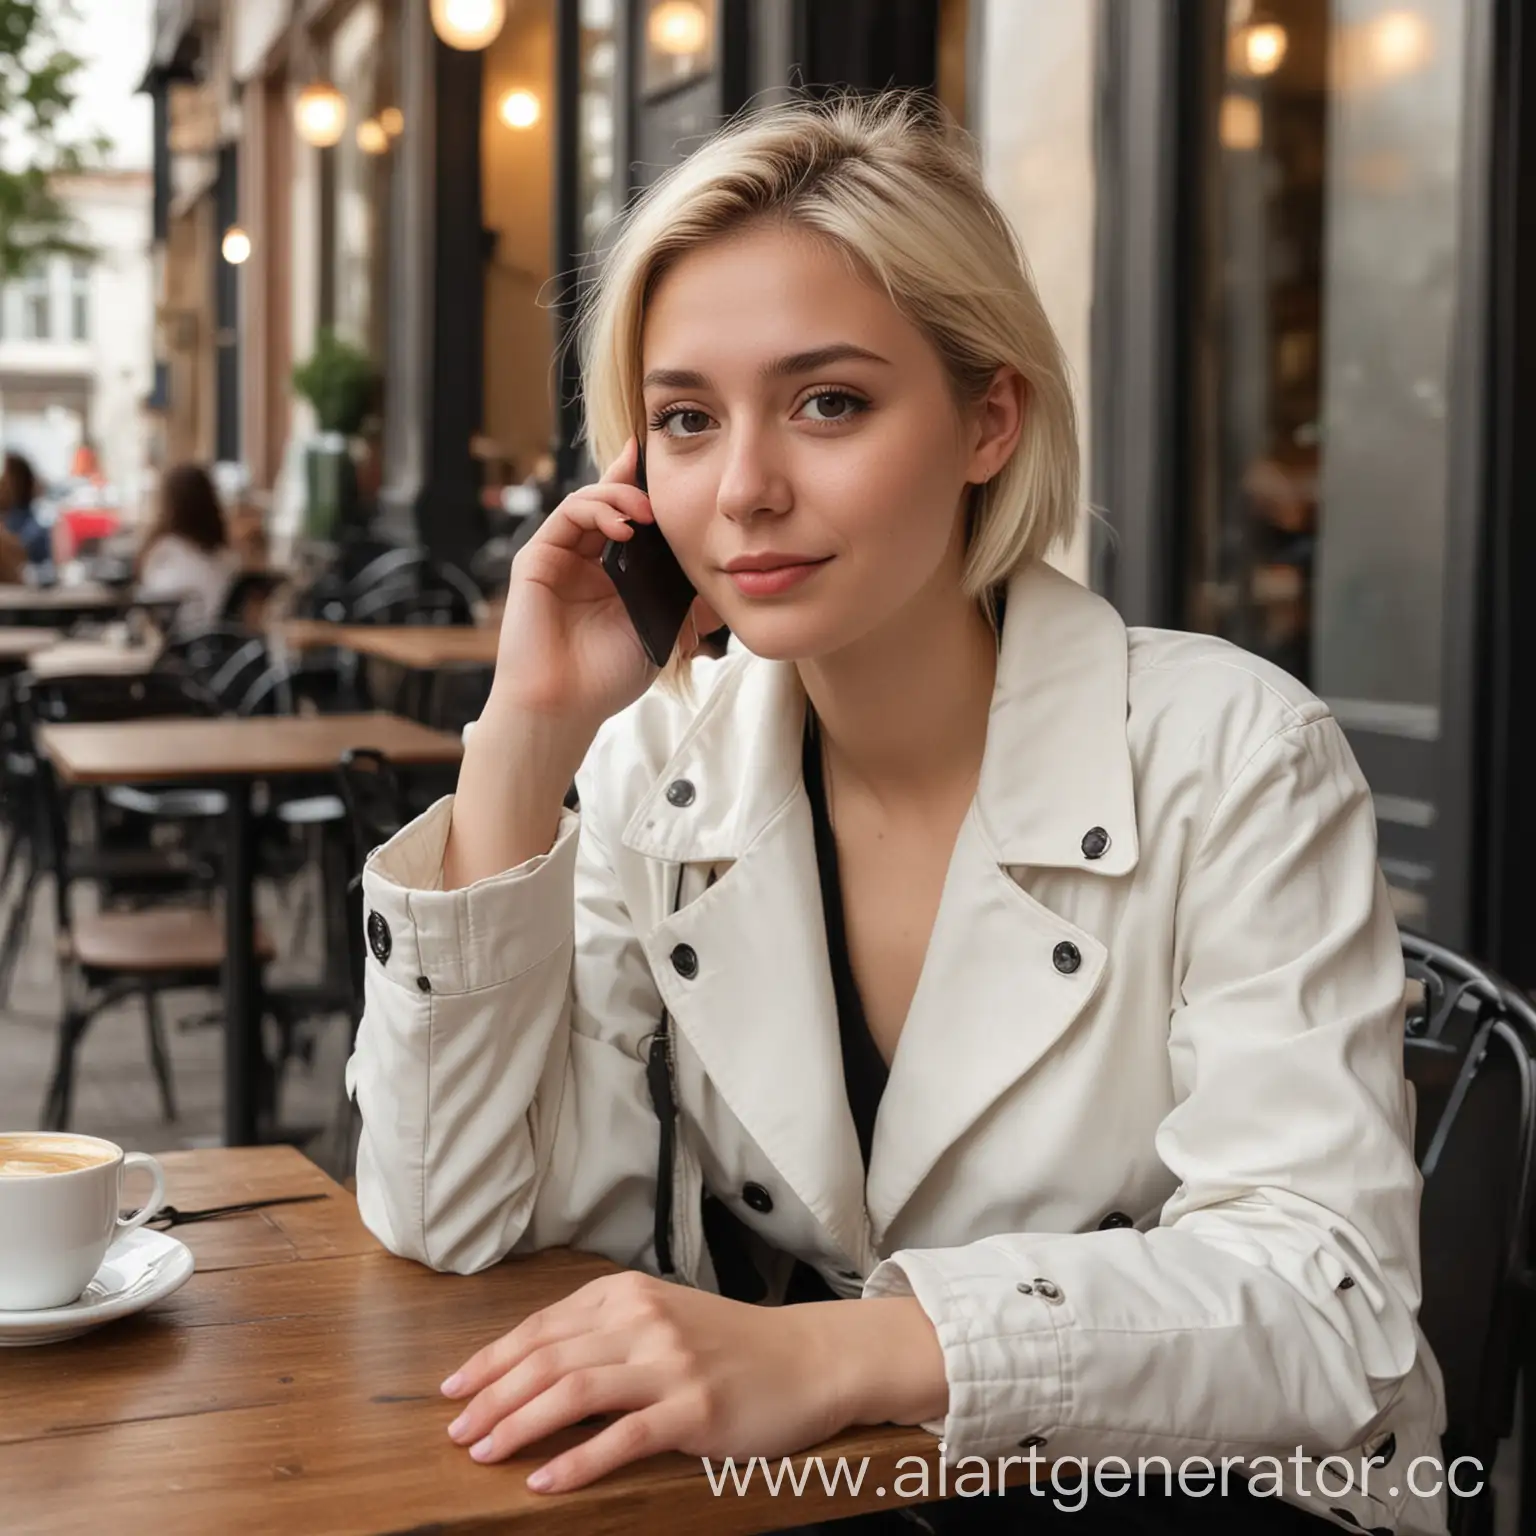 Young-Woman-in-Stylish-Attire-Talking-on-Phone-in-Cafe